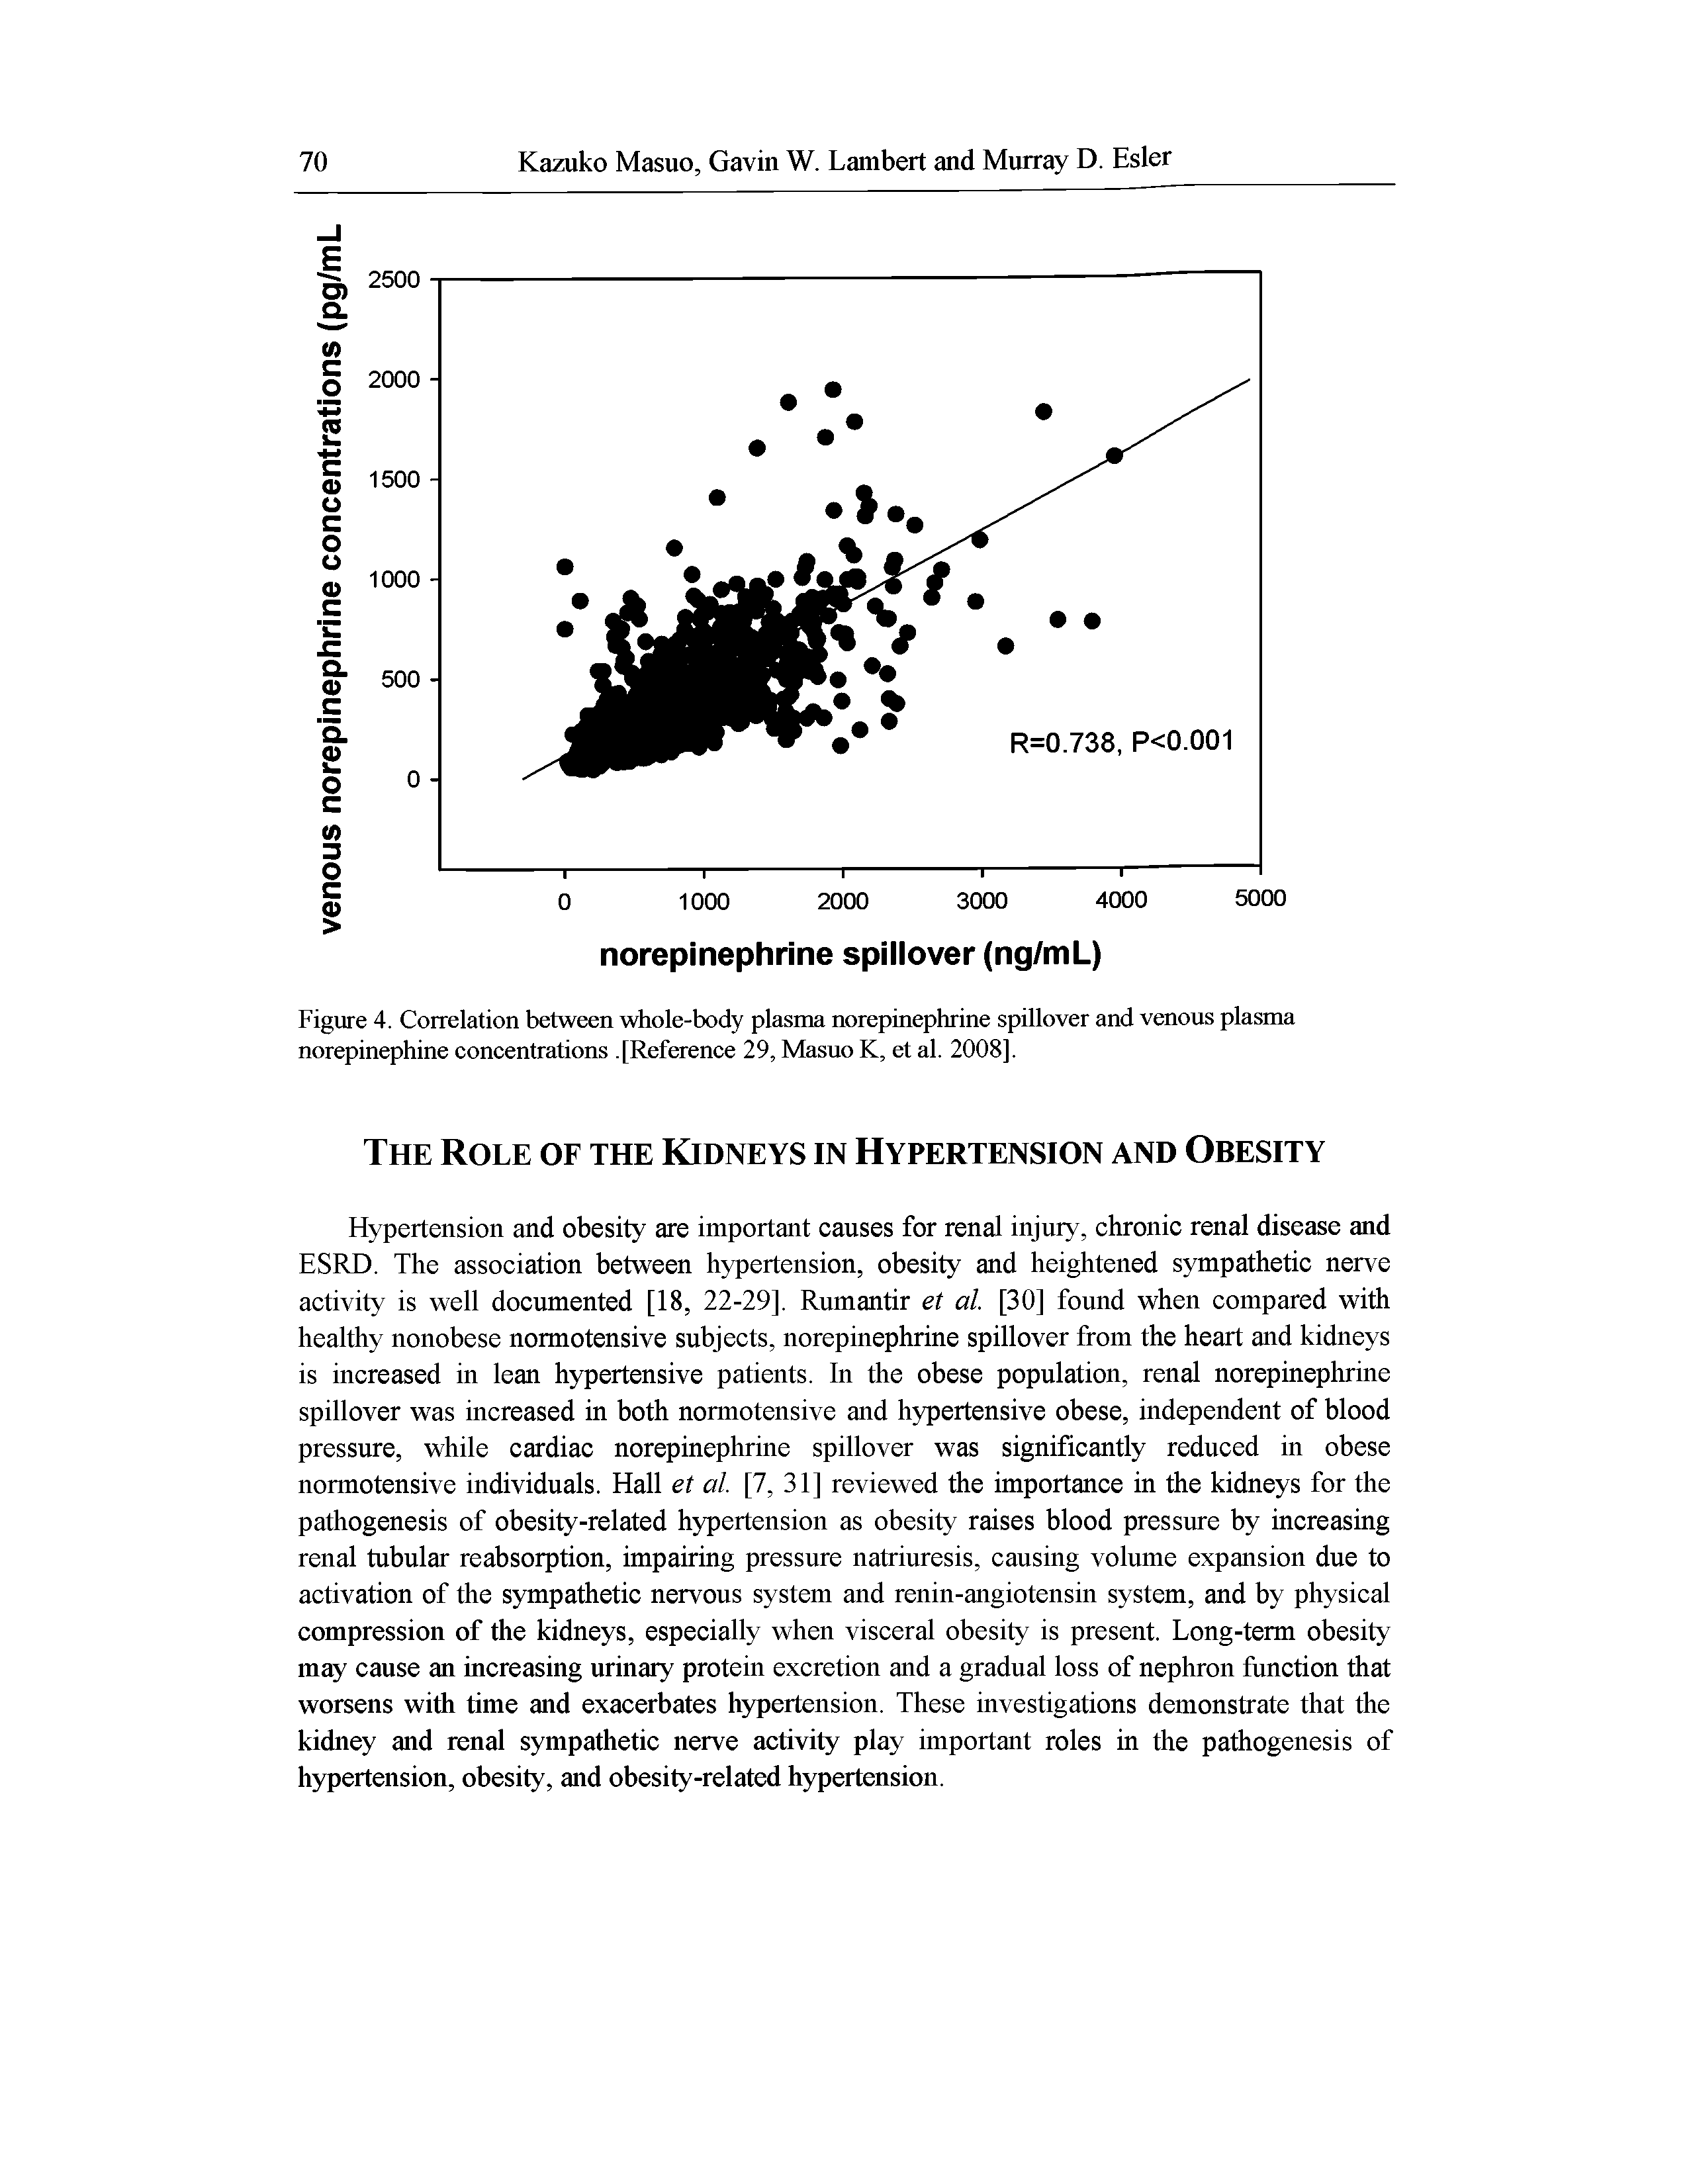 Figure 4. Correlation between whole-body plasma norepinephrine spillover and venous plasma norepinephine concentrations. [Reference 29, Masuo K, et al. 2008].